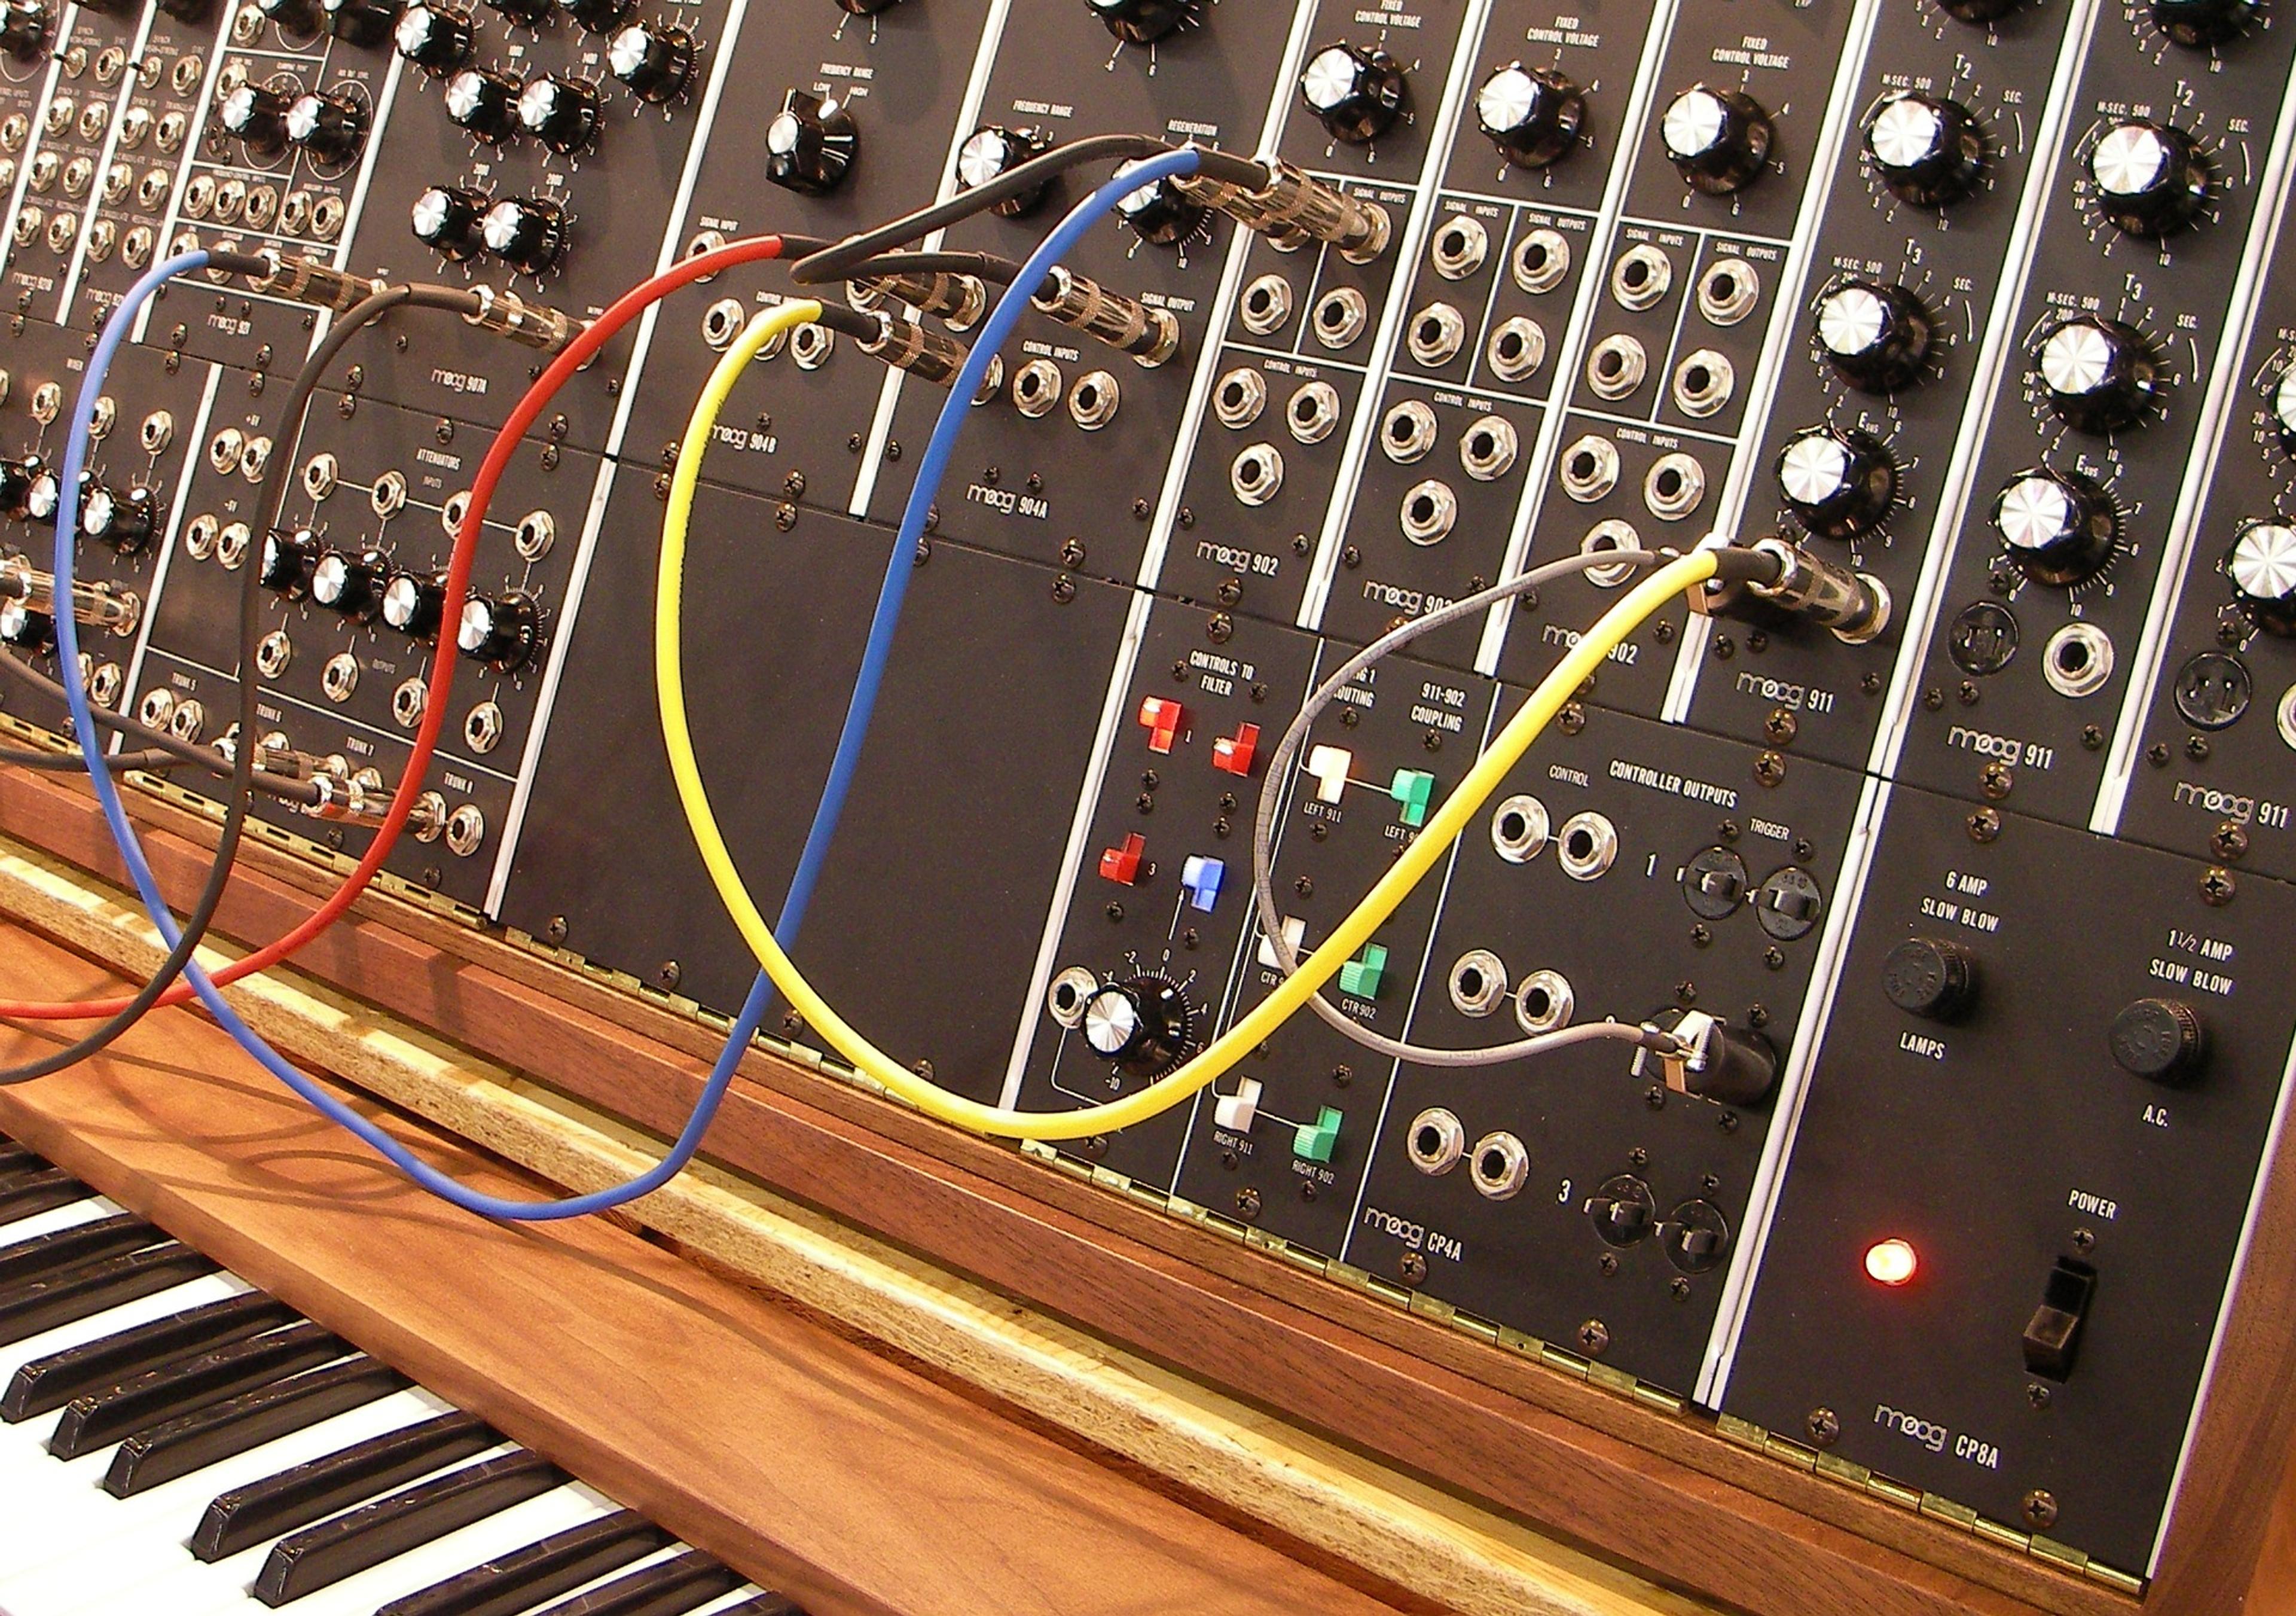 Keyboard synthesizer with patch cables